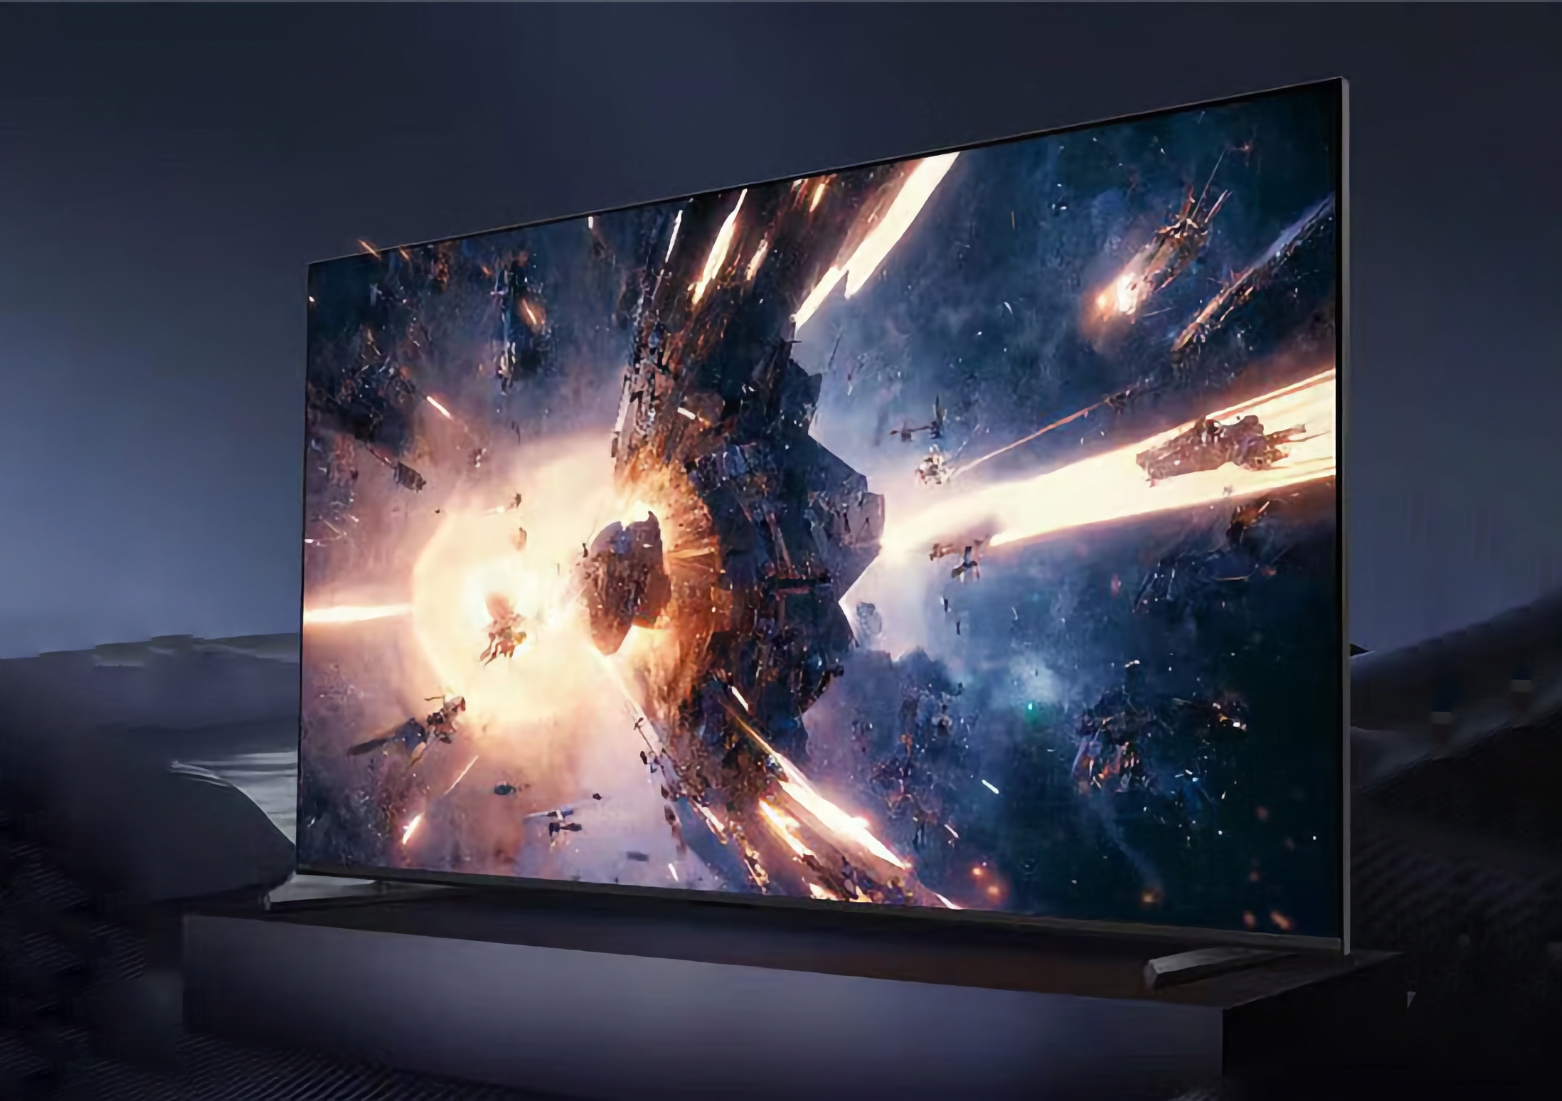 Sony Gaming TV X90L: Gaming range of smart TVs with 4K screens at 120Hz, up to 98" and HDMI 2.1